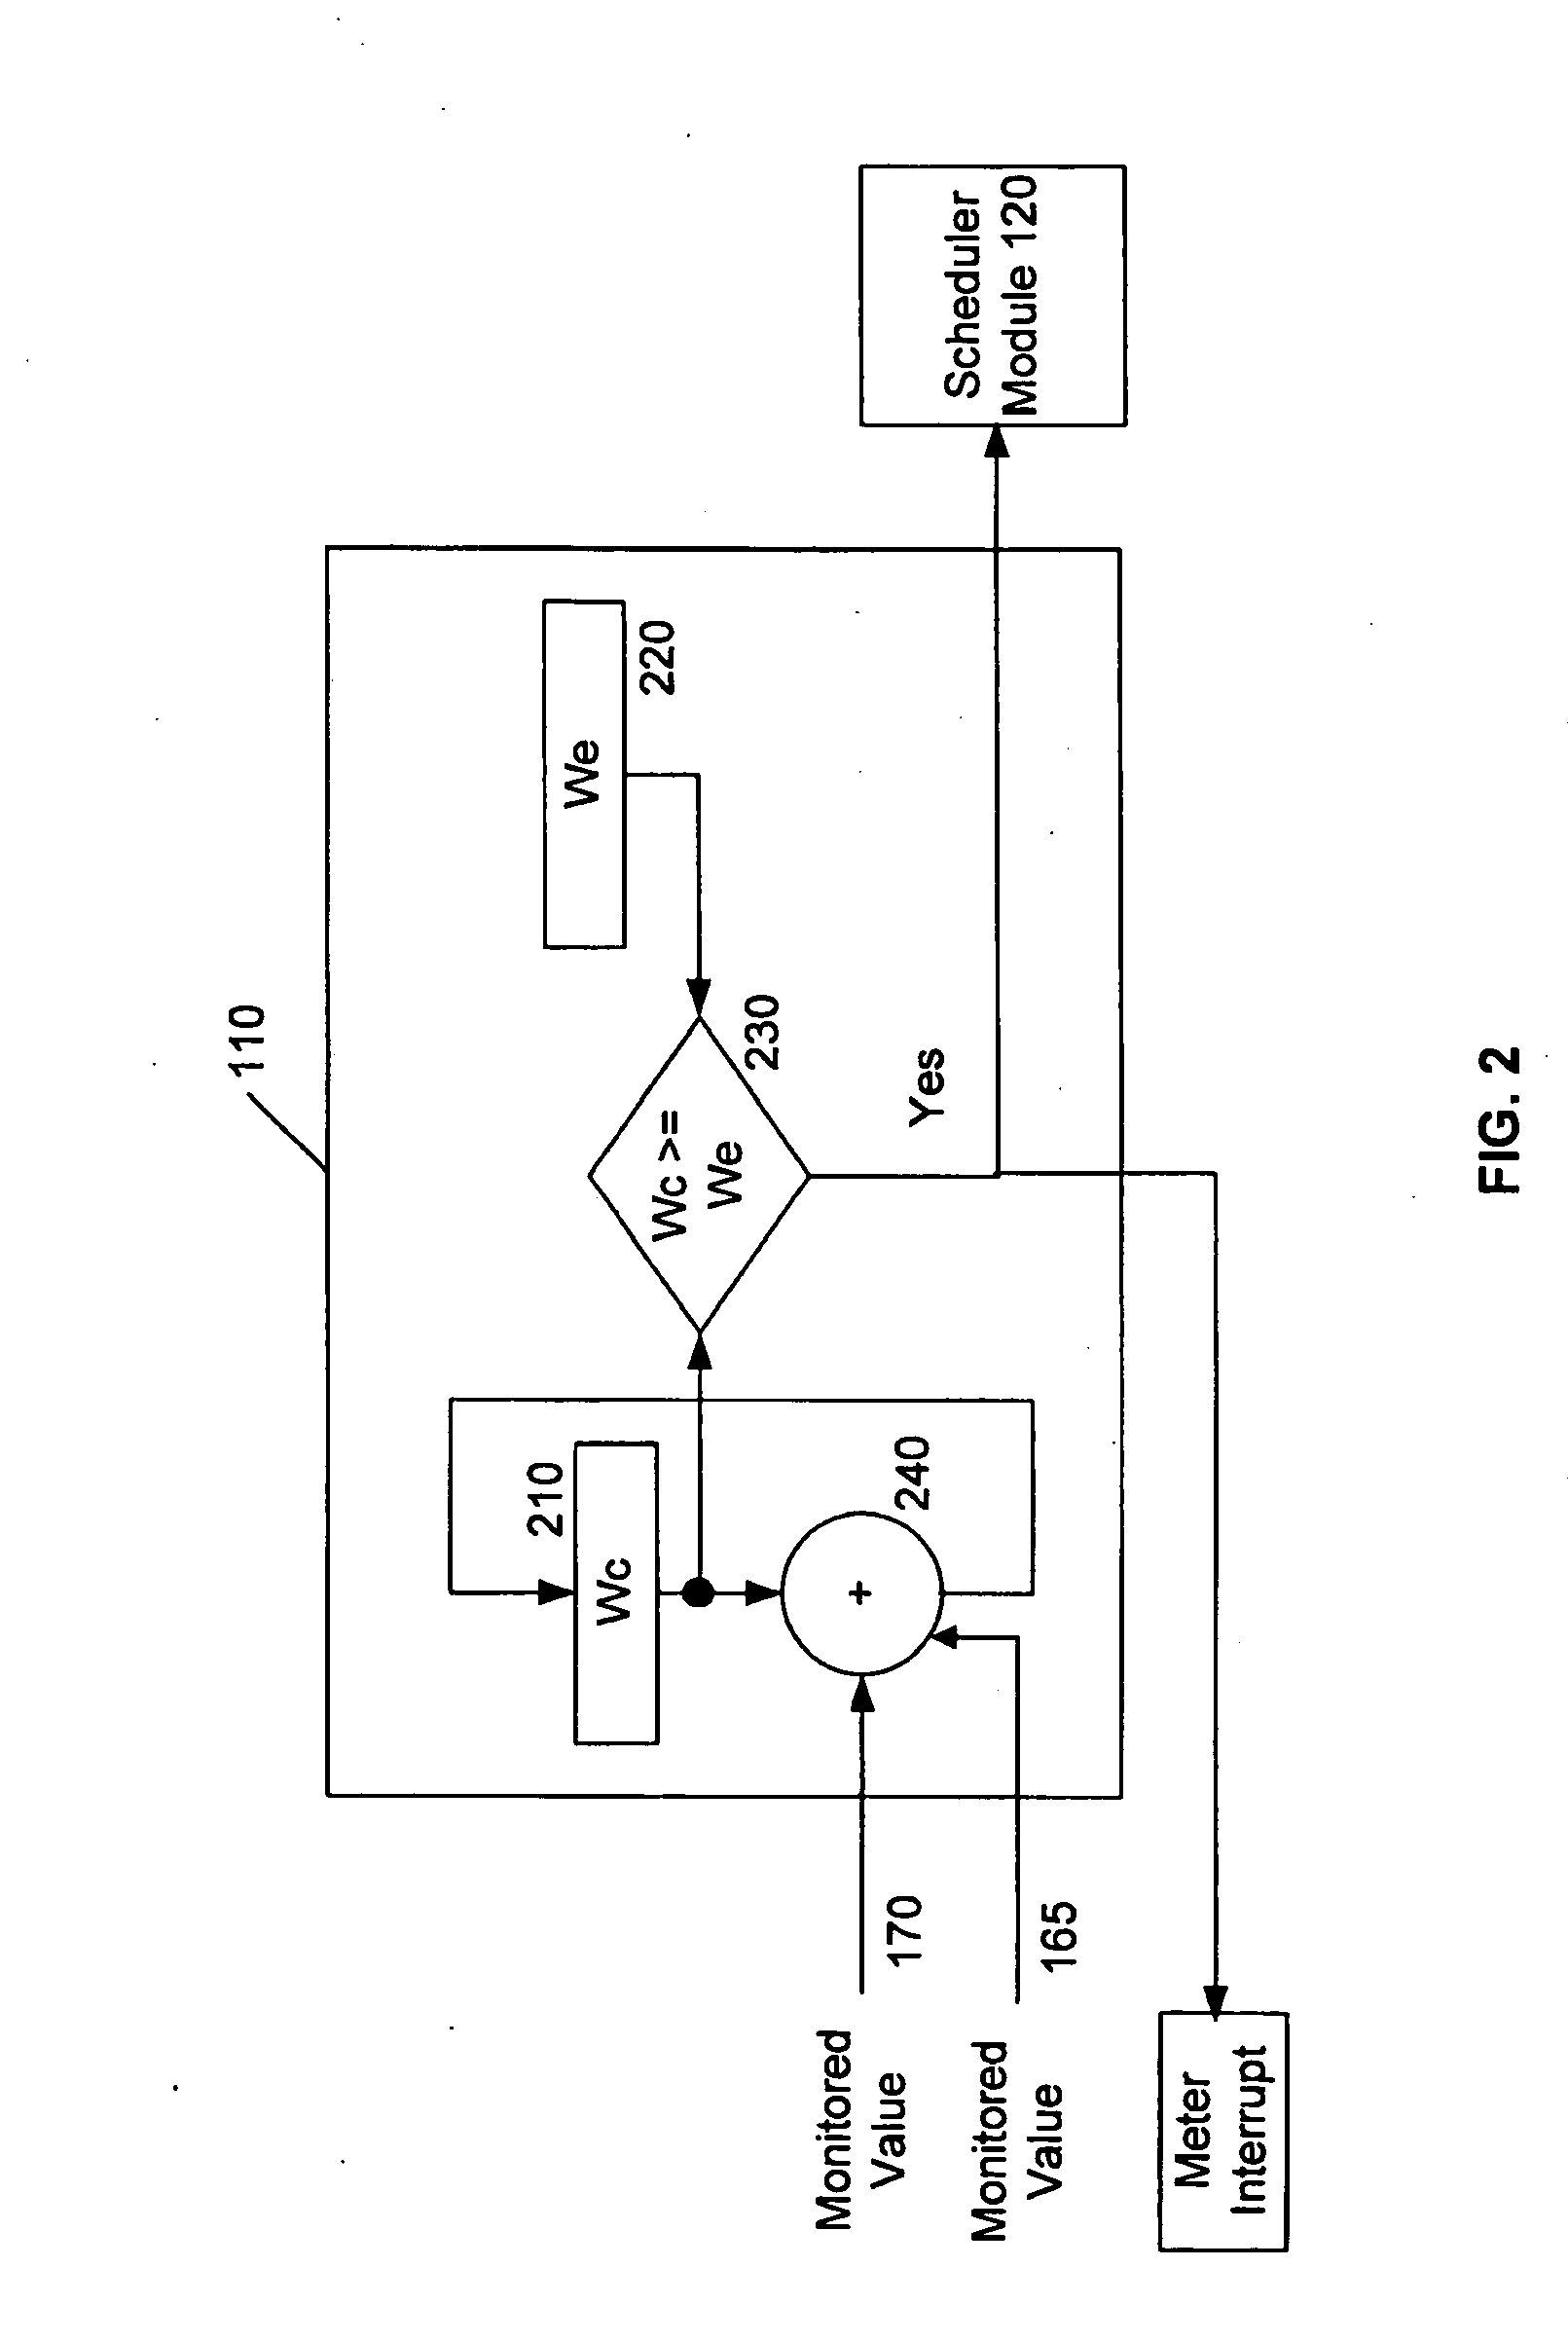 Method and apparatus for fine grain performance management of computer systems